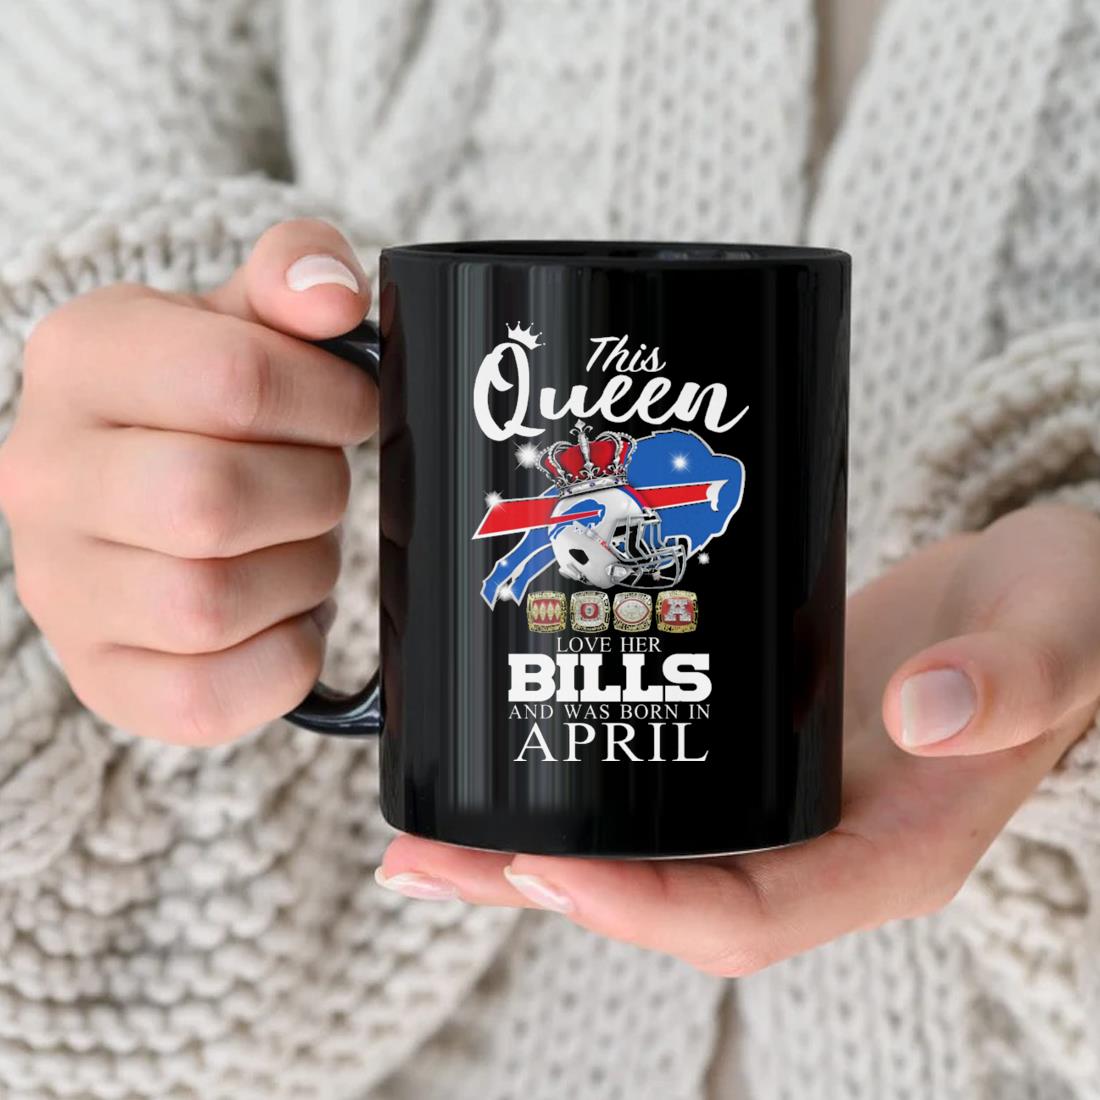 This Queen Love Her Bills And Was Born In April Mug nhu